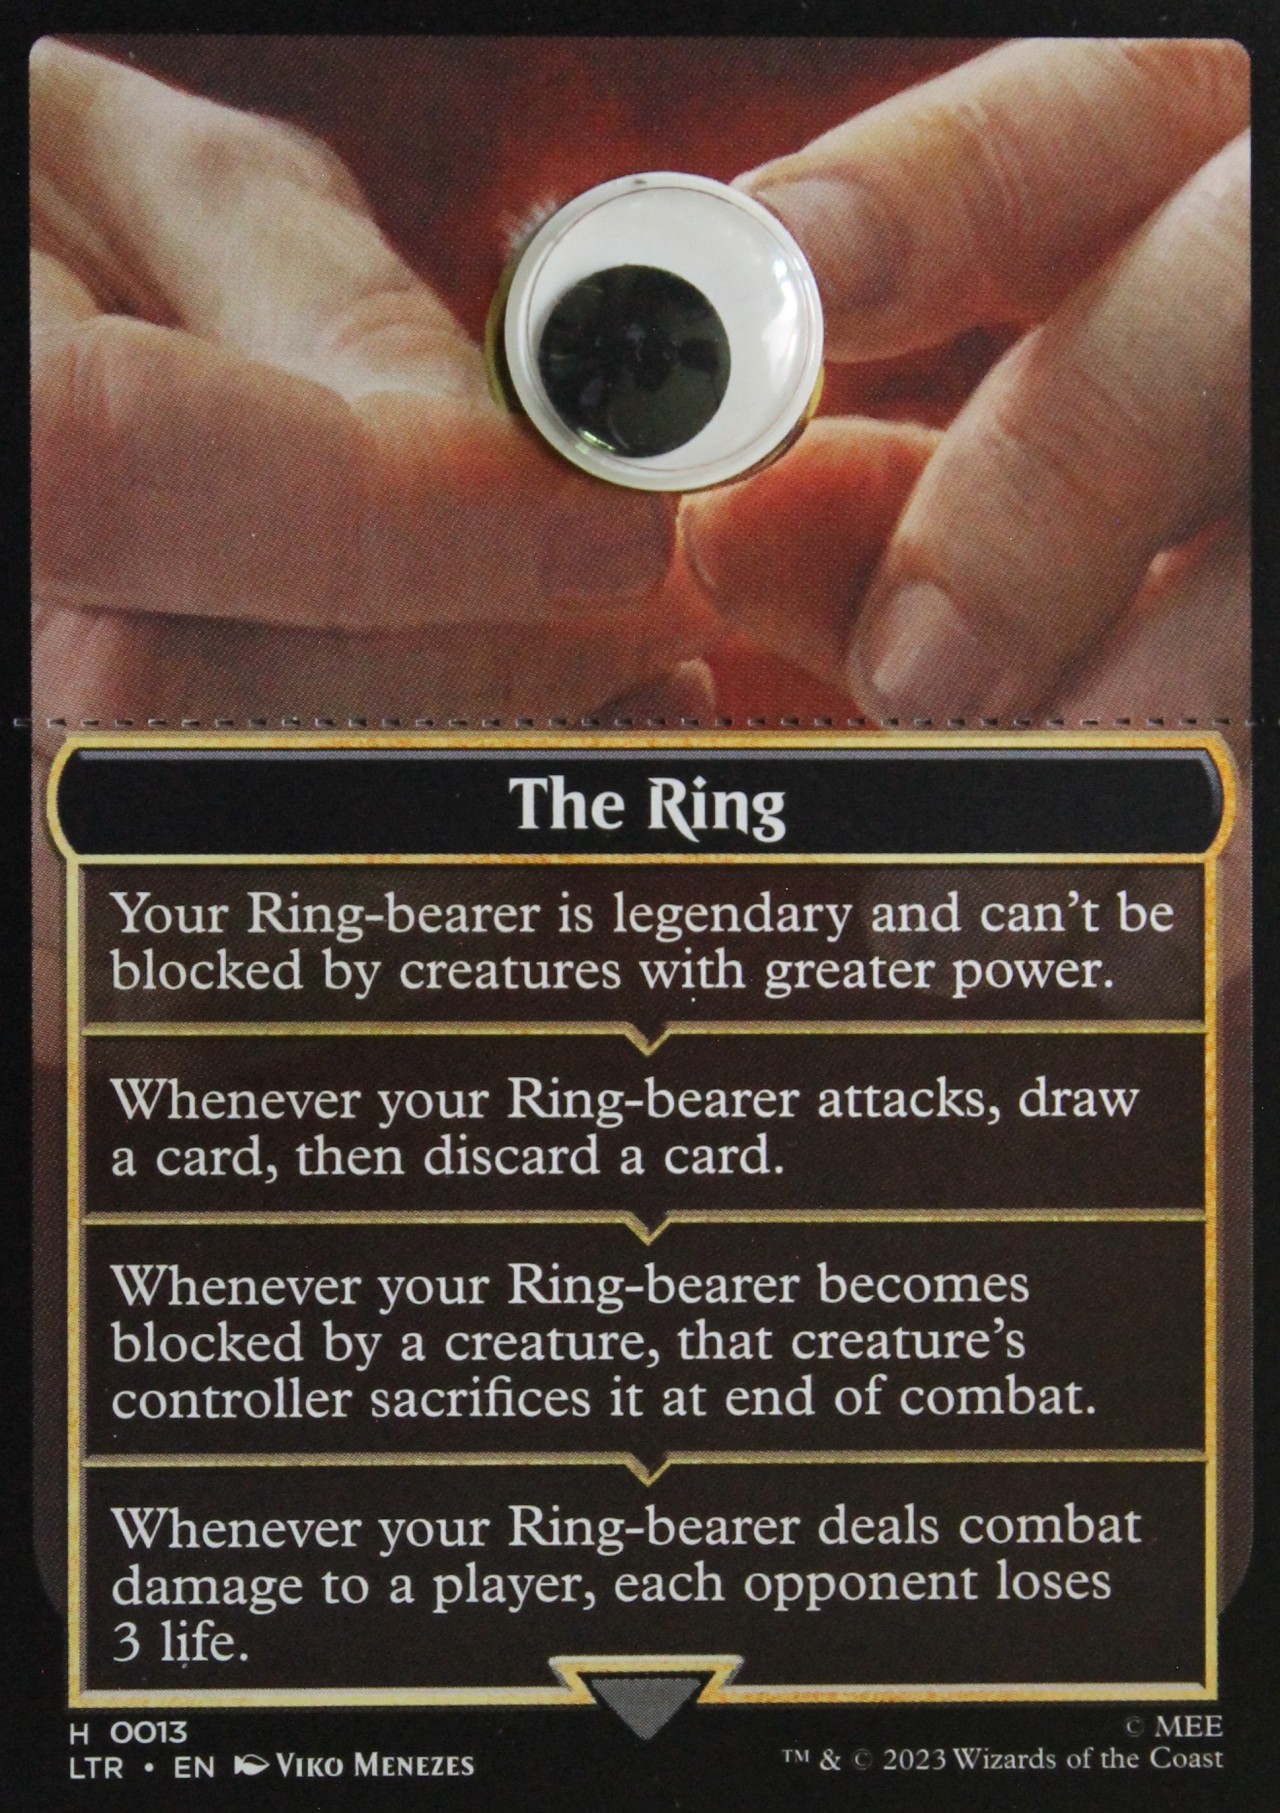 Bidding For The Serialized 001/001 One Ring Is At Two Million Dollars!